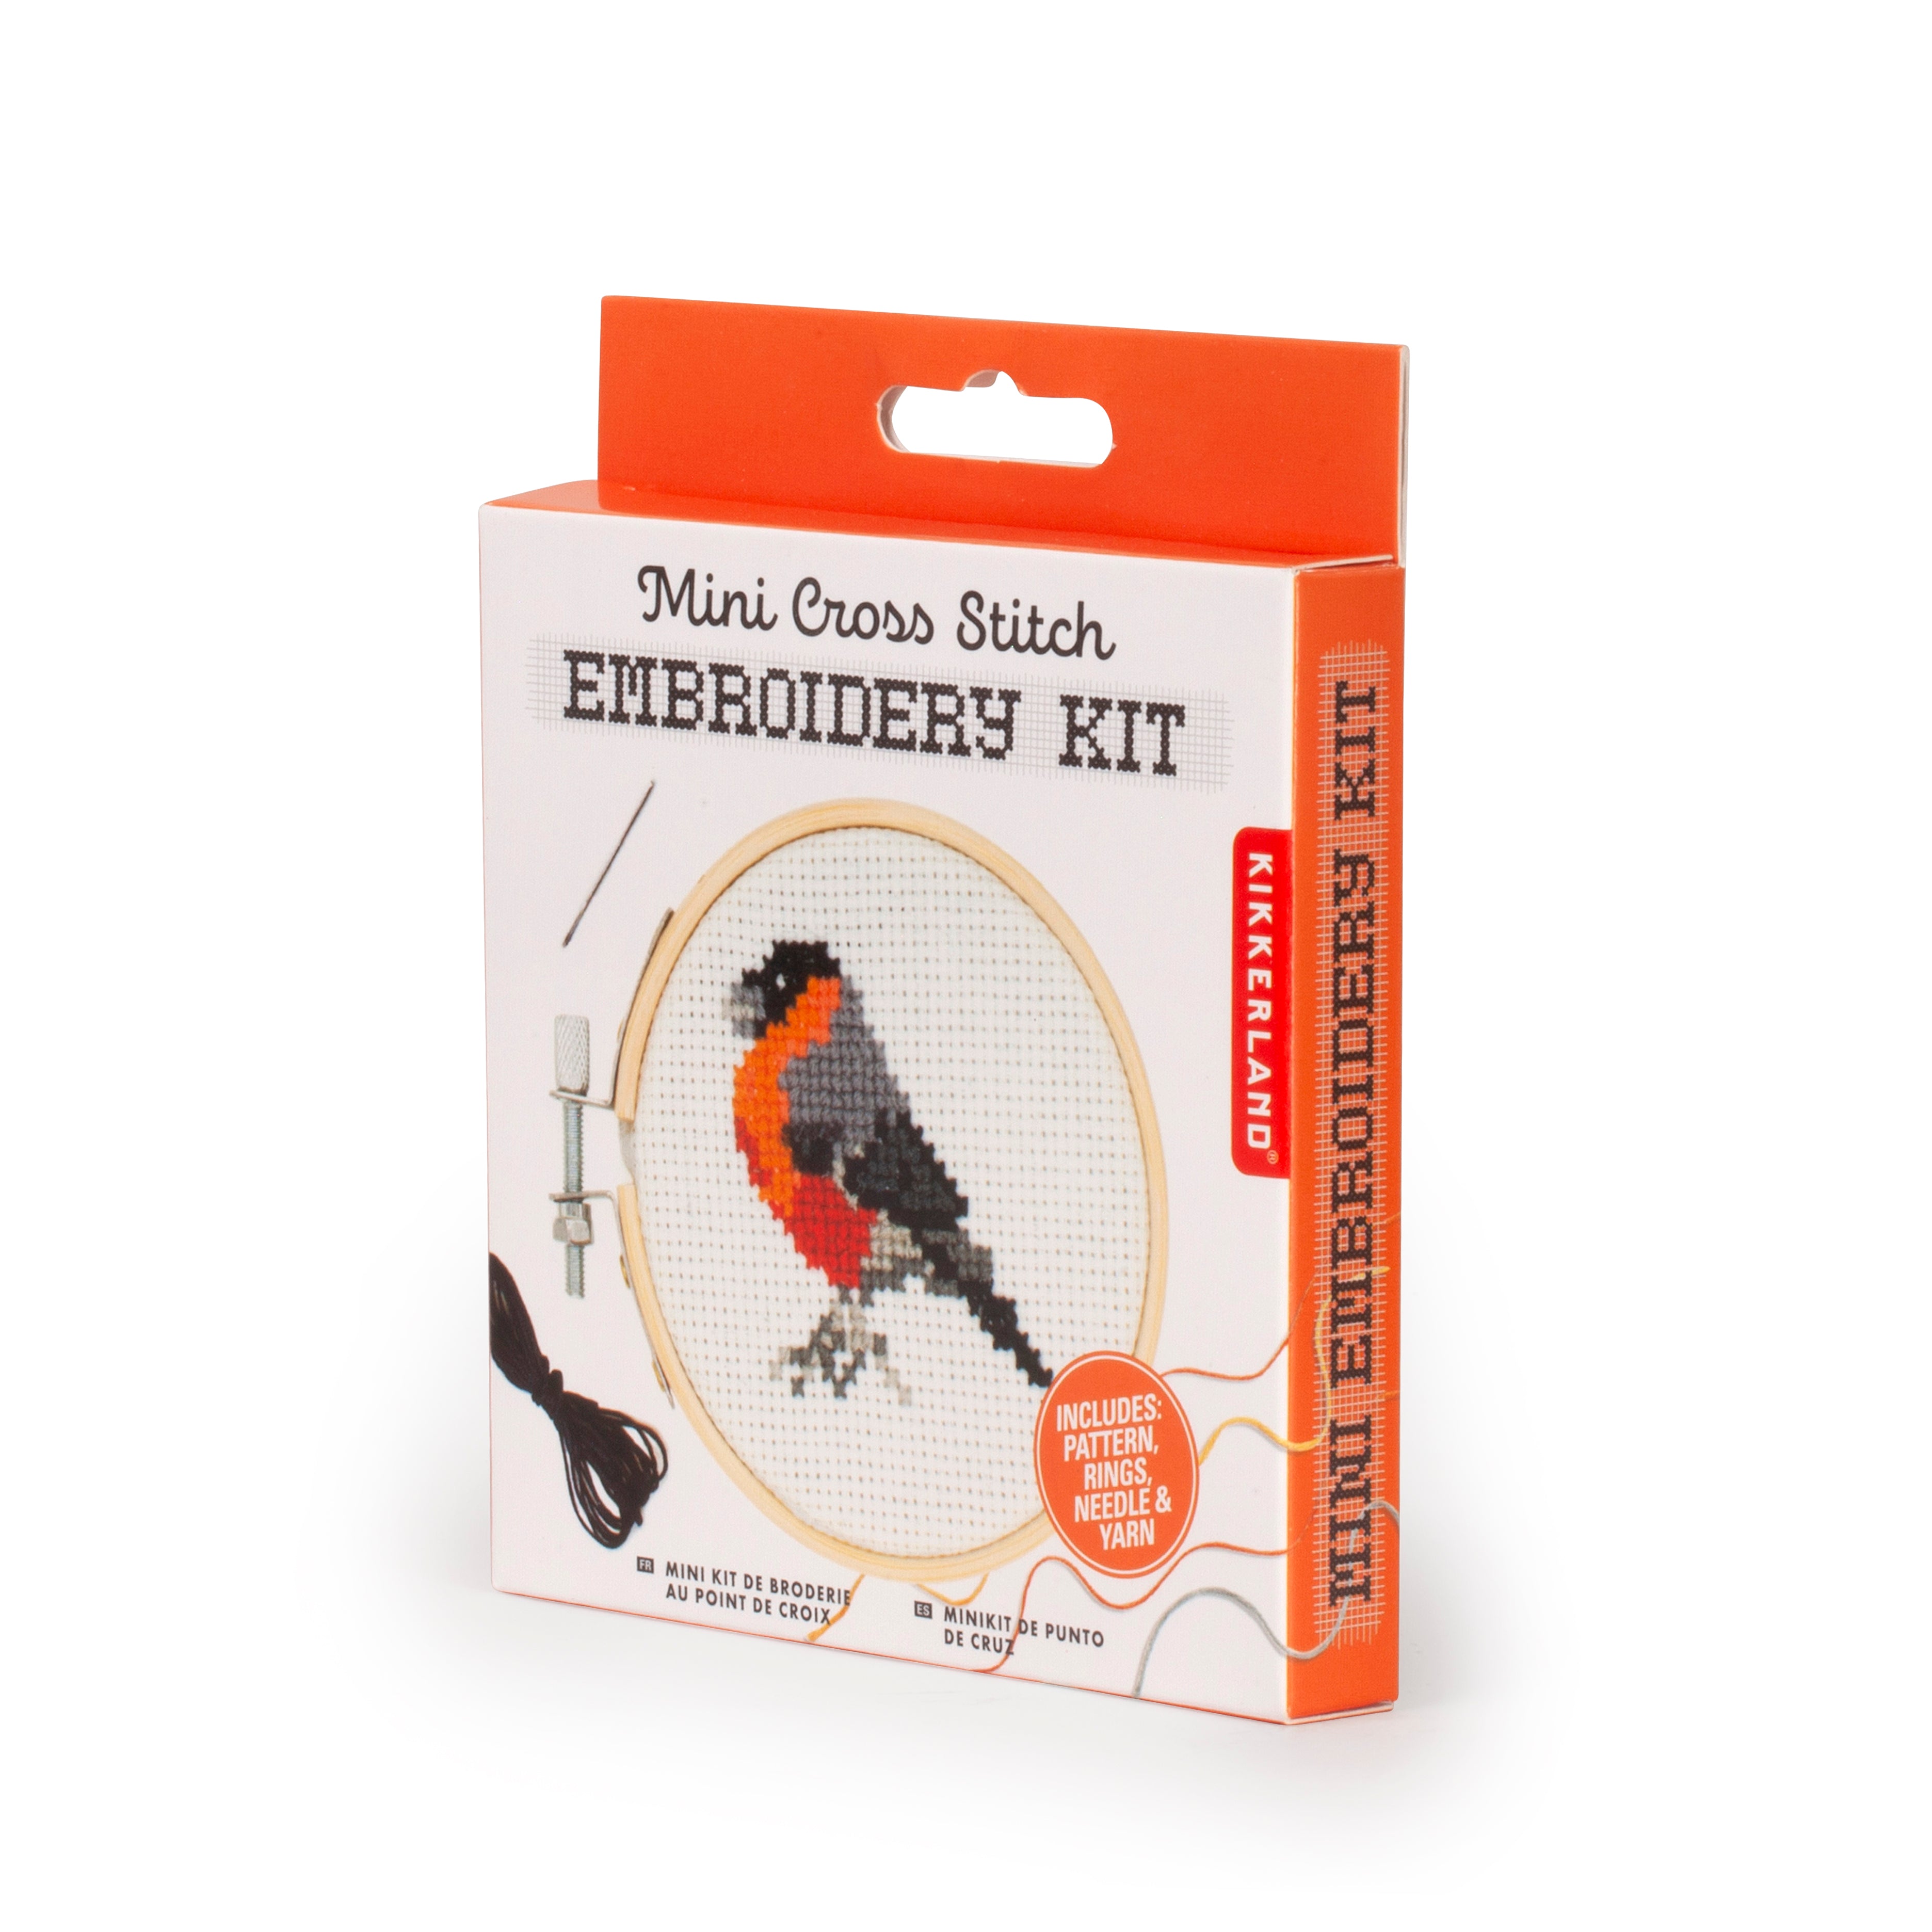 Hand embroidery kit for beginners Little birds